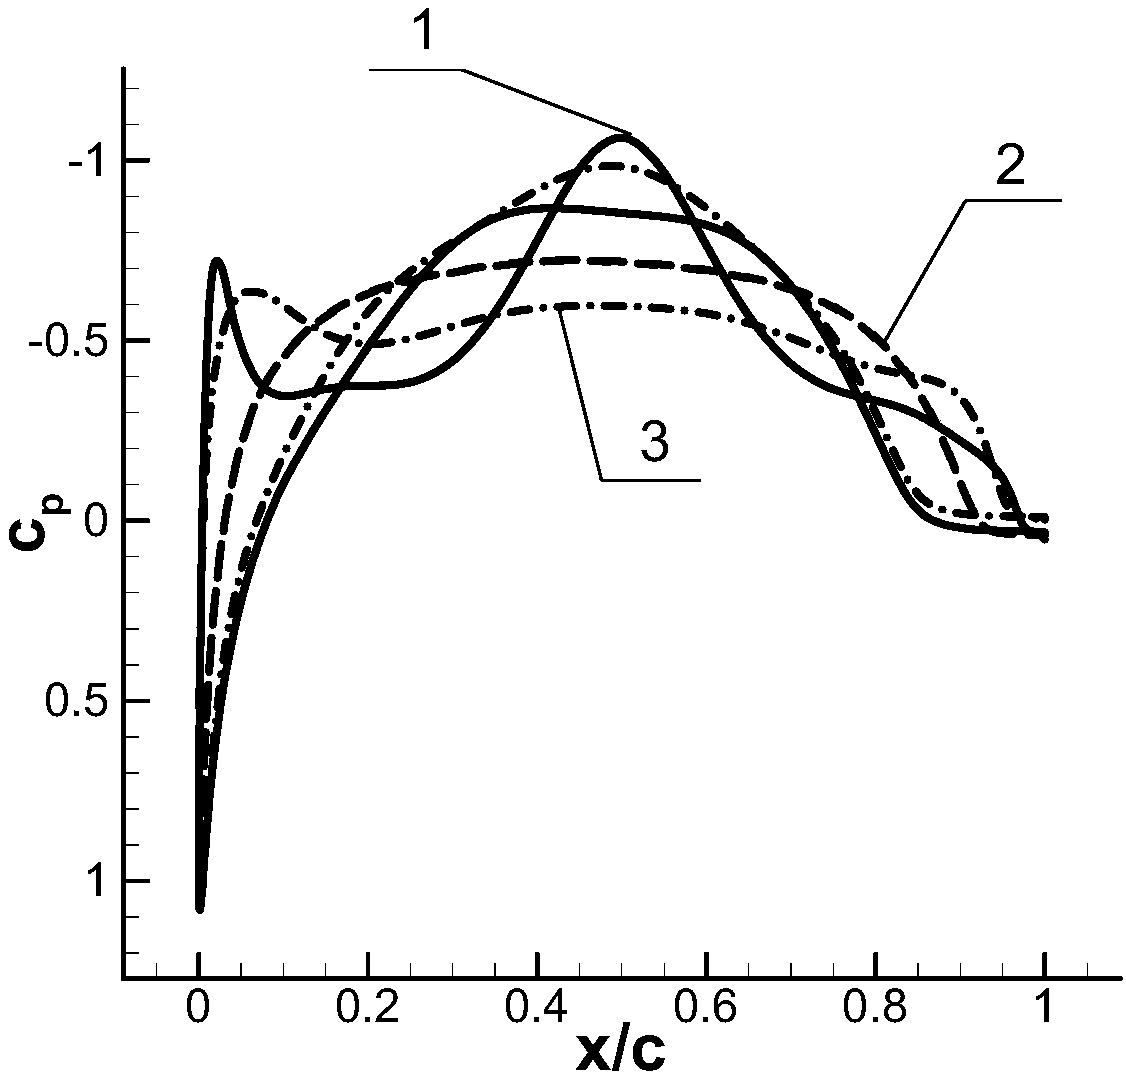 Quasi-elliptical airfoil for high-speed helicopter rotor reflux region